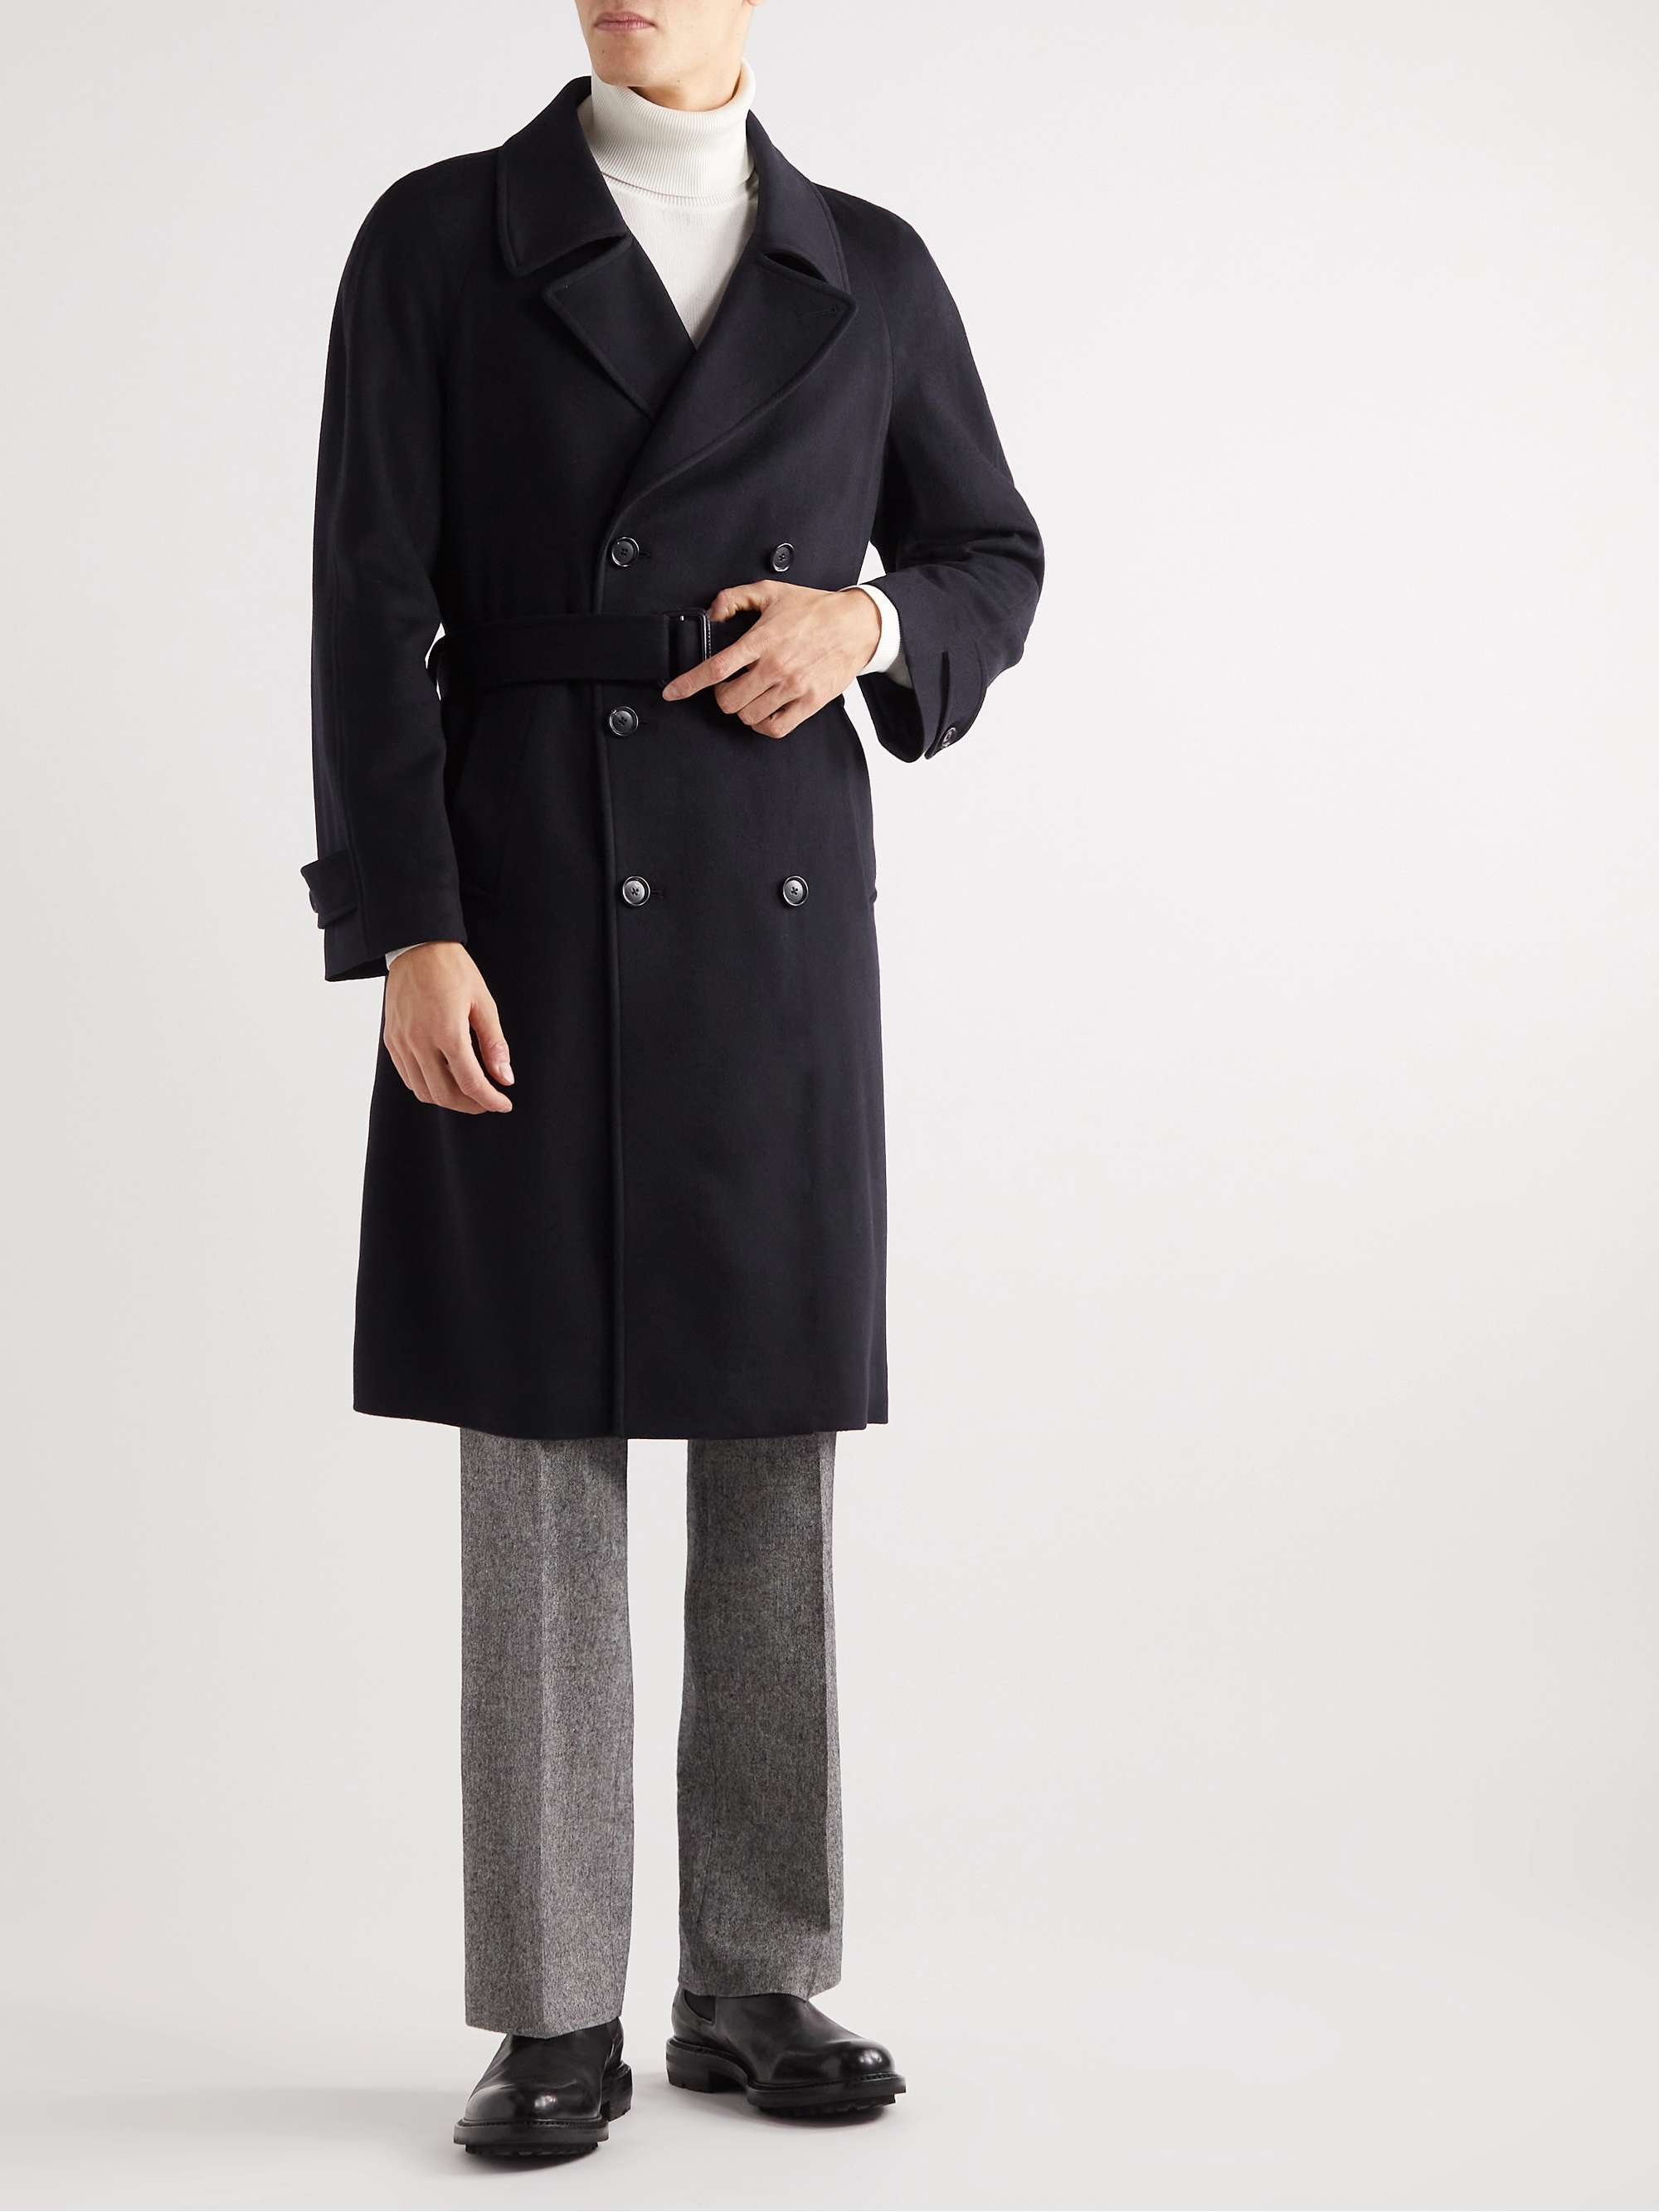 DE PETRILLO Double-Breasted Virgin Wool and Cashmere-Blend Trench Coat